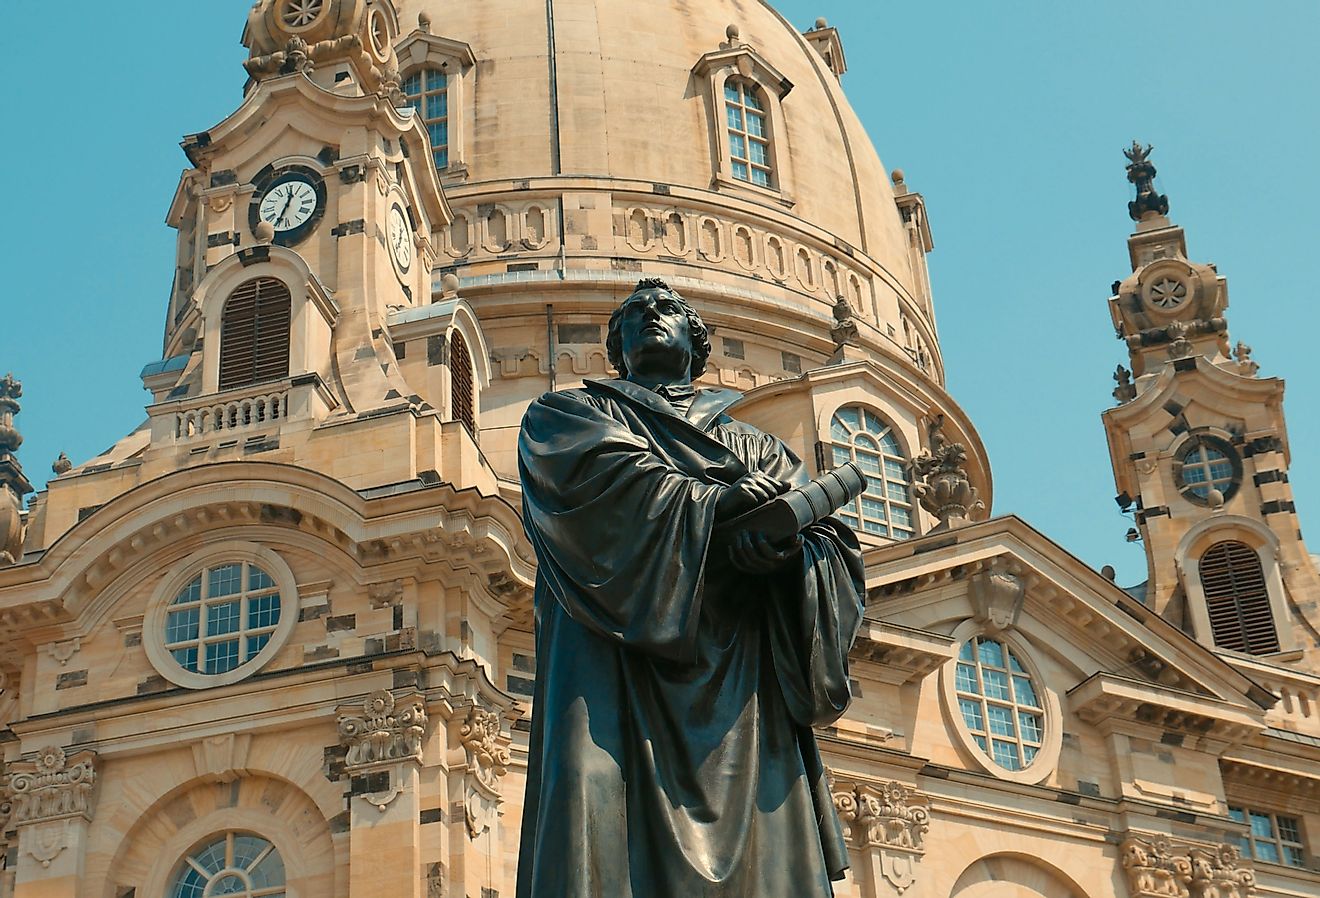 Monument of Martin Luther, the founder of the Protestant Reformation. Image credit Igor Banaszczyk via Shutterstock